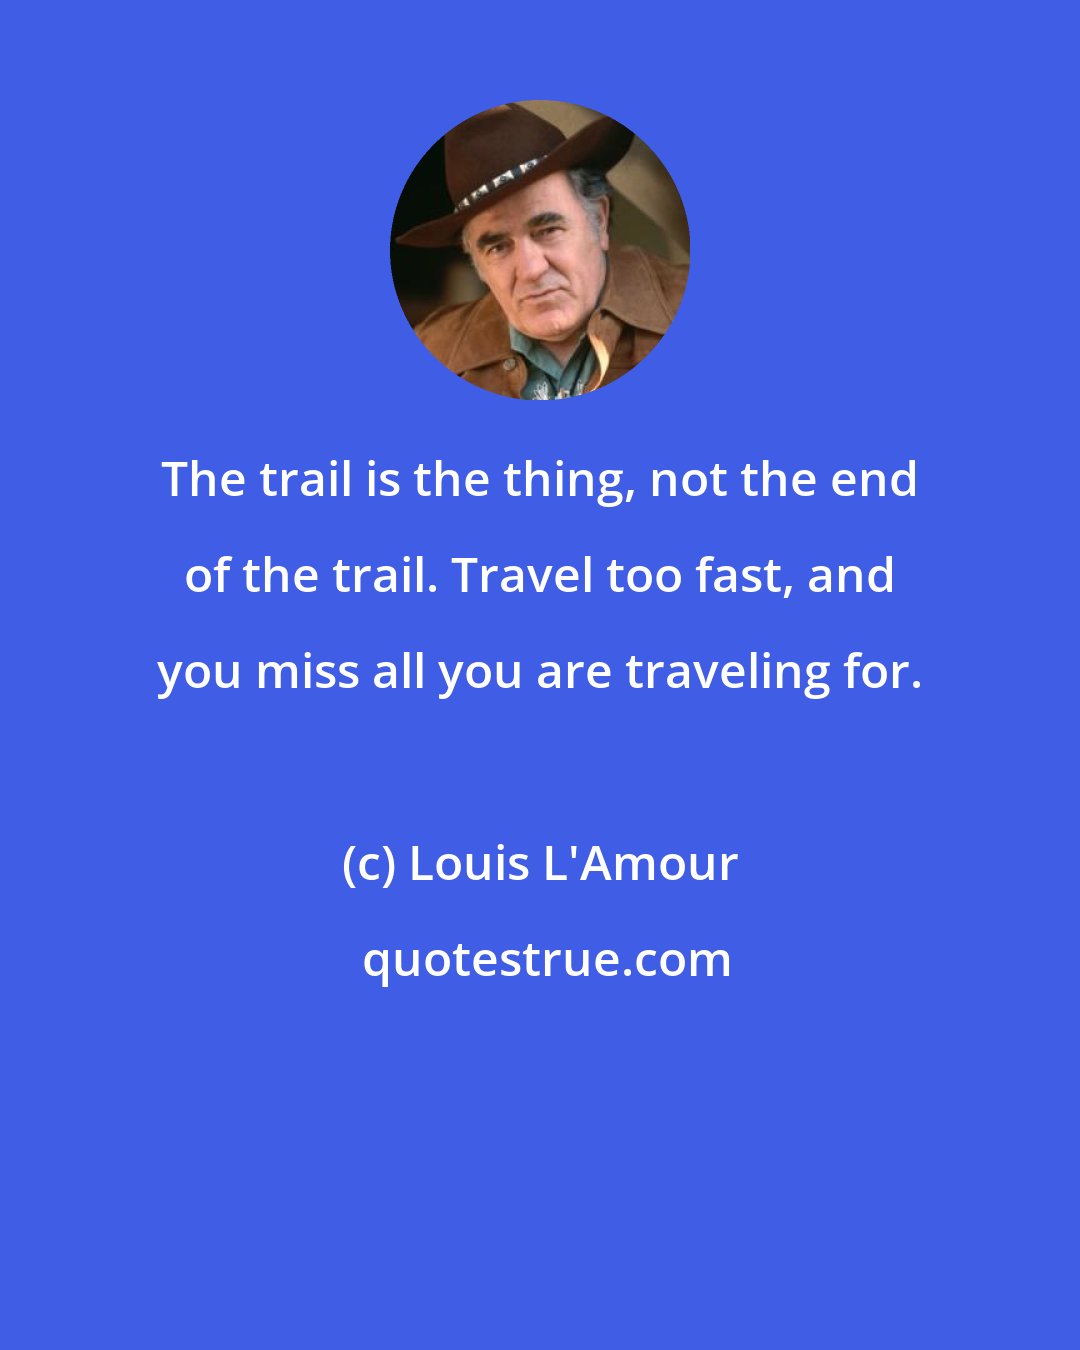 Louis L'Amour: The trail is the thing, not the end of the trail. Travel too fast, and you miss all you are traveling for.